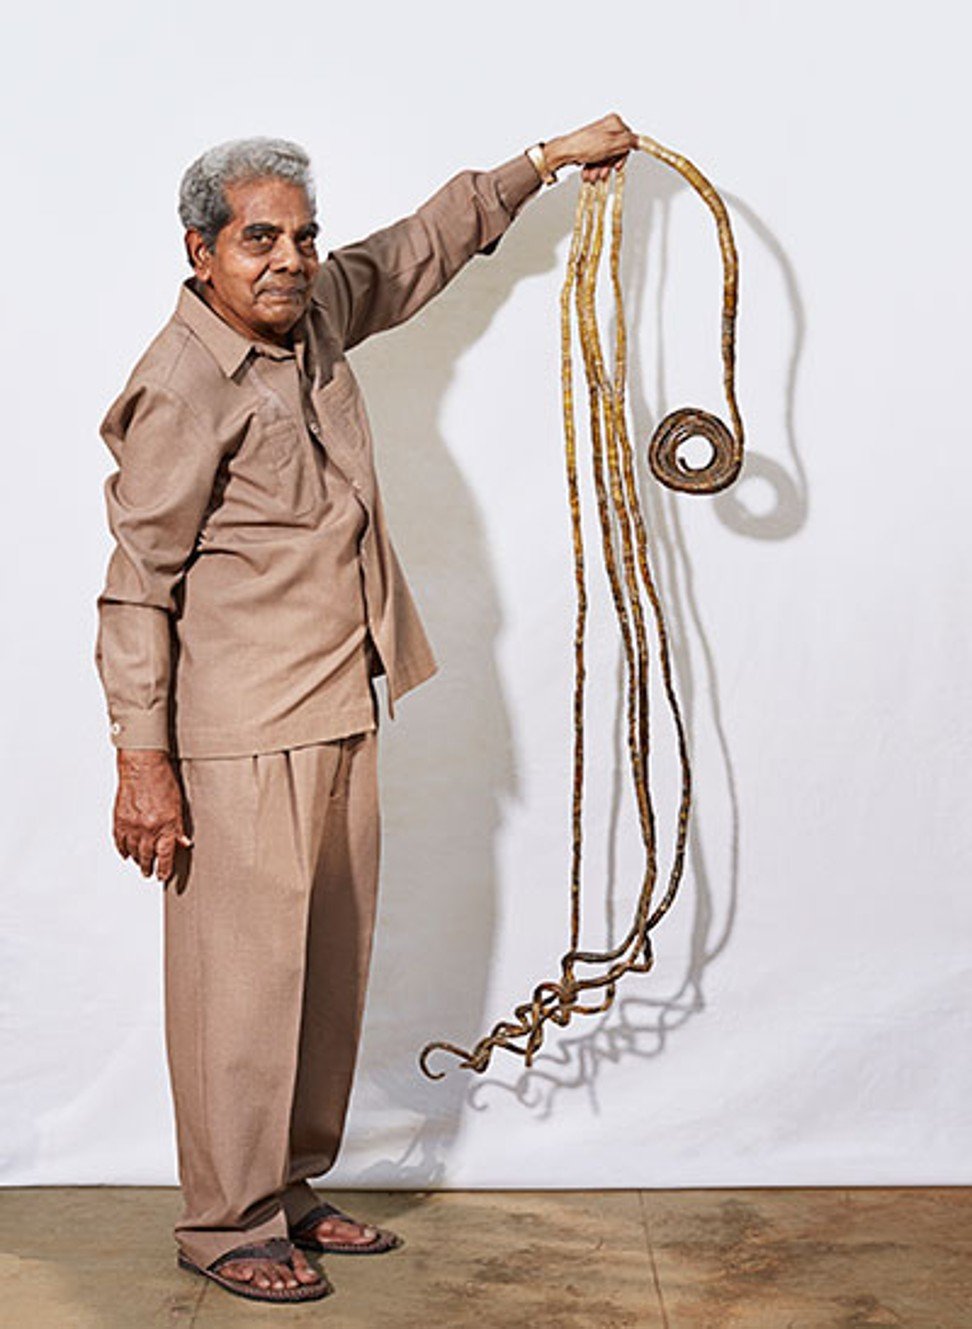 Man with worlds longest nails gets a much needed manicure - Blurred Culture